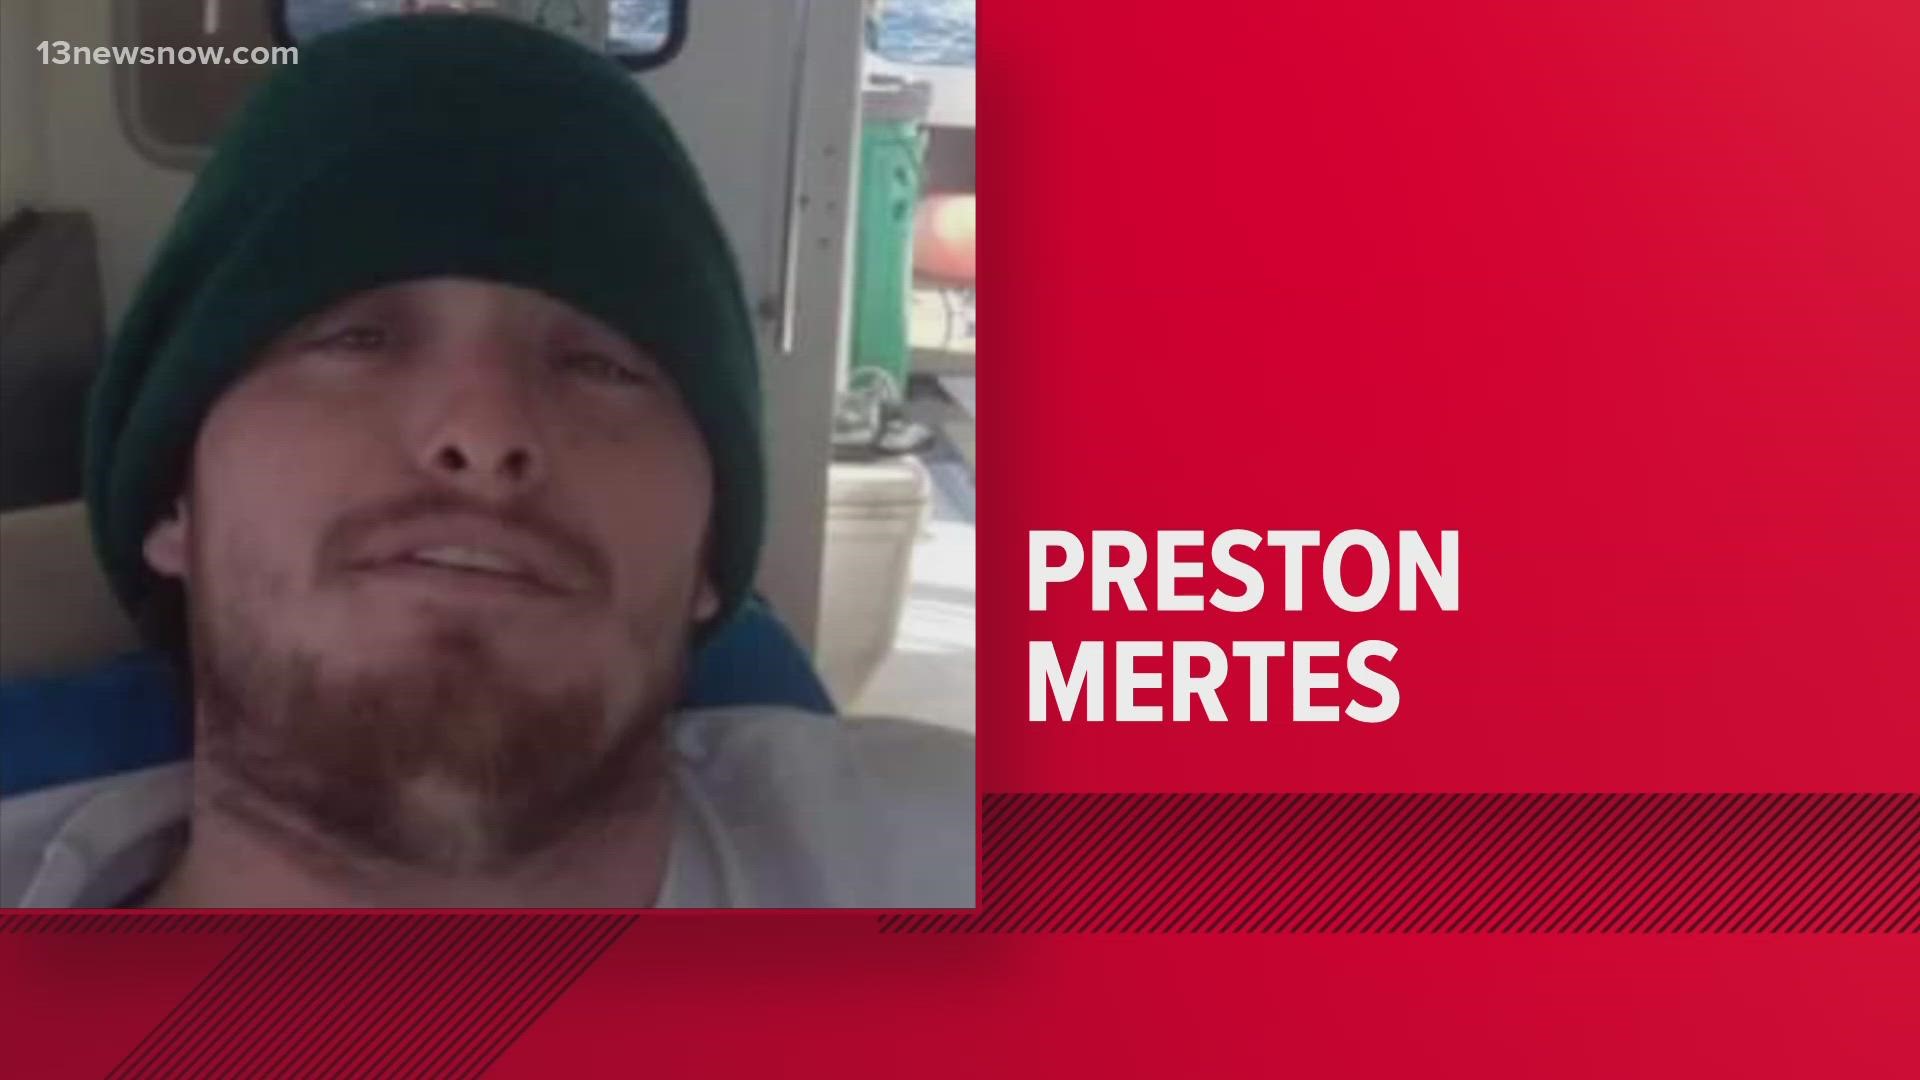 The Currituck Sheriff's Office ask any residents who see anything suspicious to call 911 and not to approach Preston Mertes, who is considered armed and dangerous.